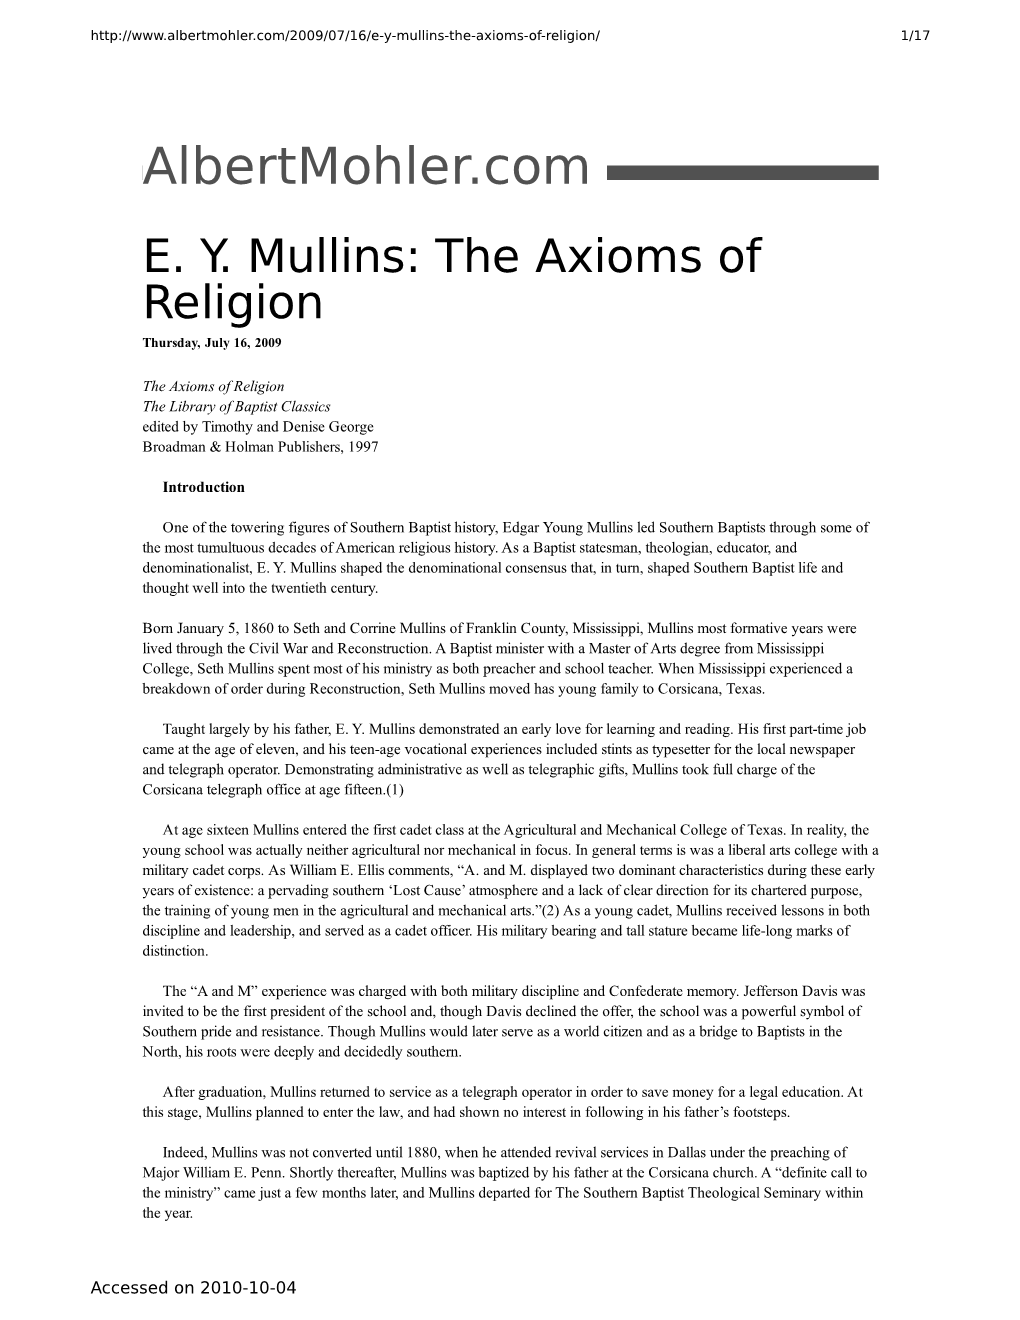 EY Mullins: the Axioms of Religion